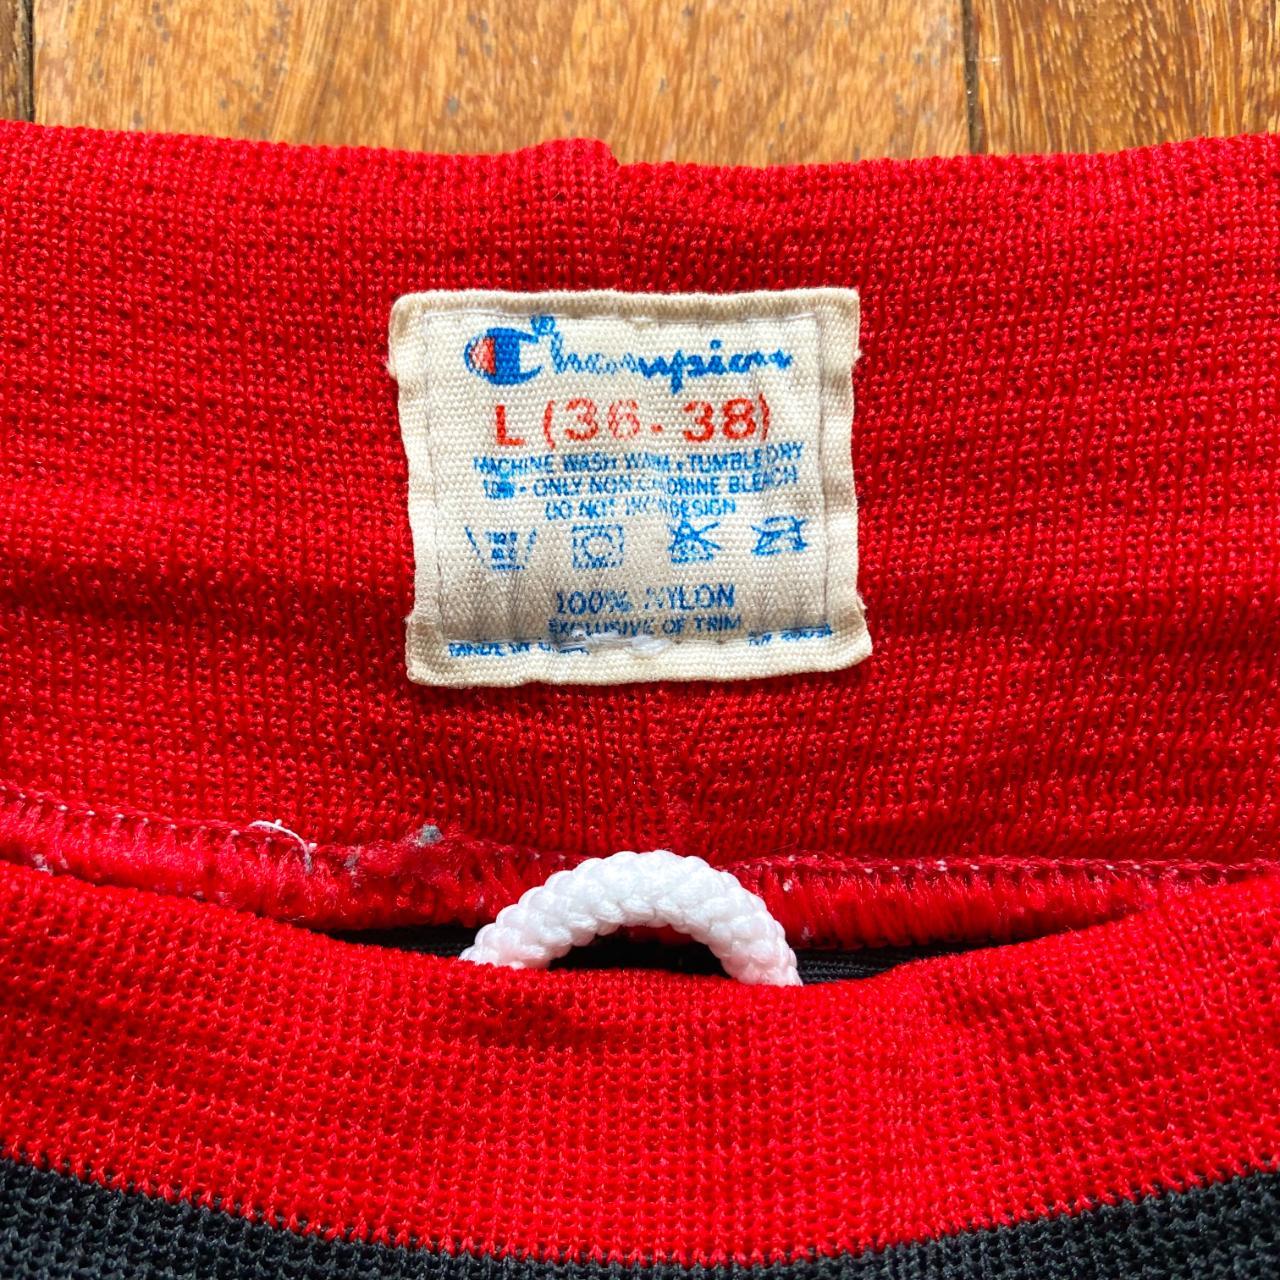 VINTAGE Chicago Bulls Shorts Mens Small S Red White - Depop